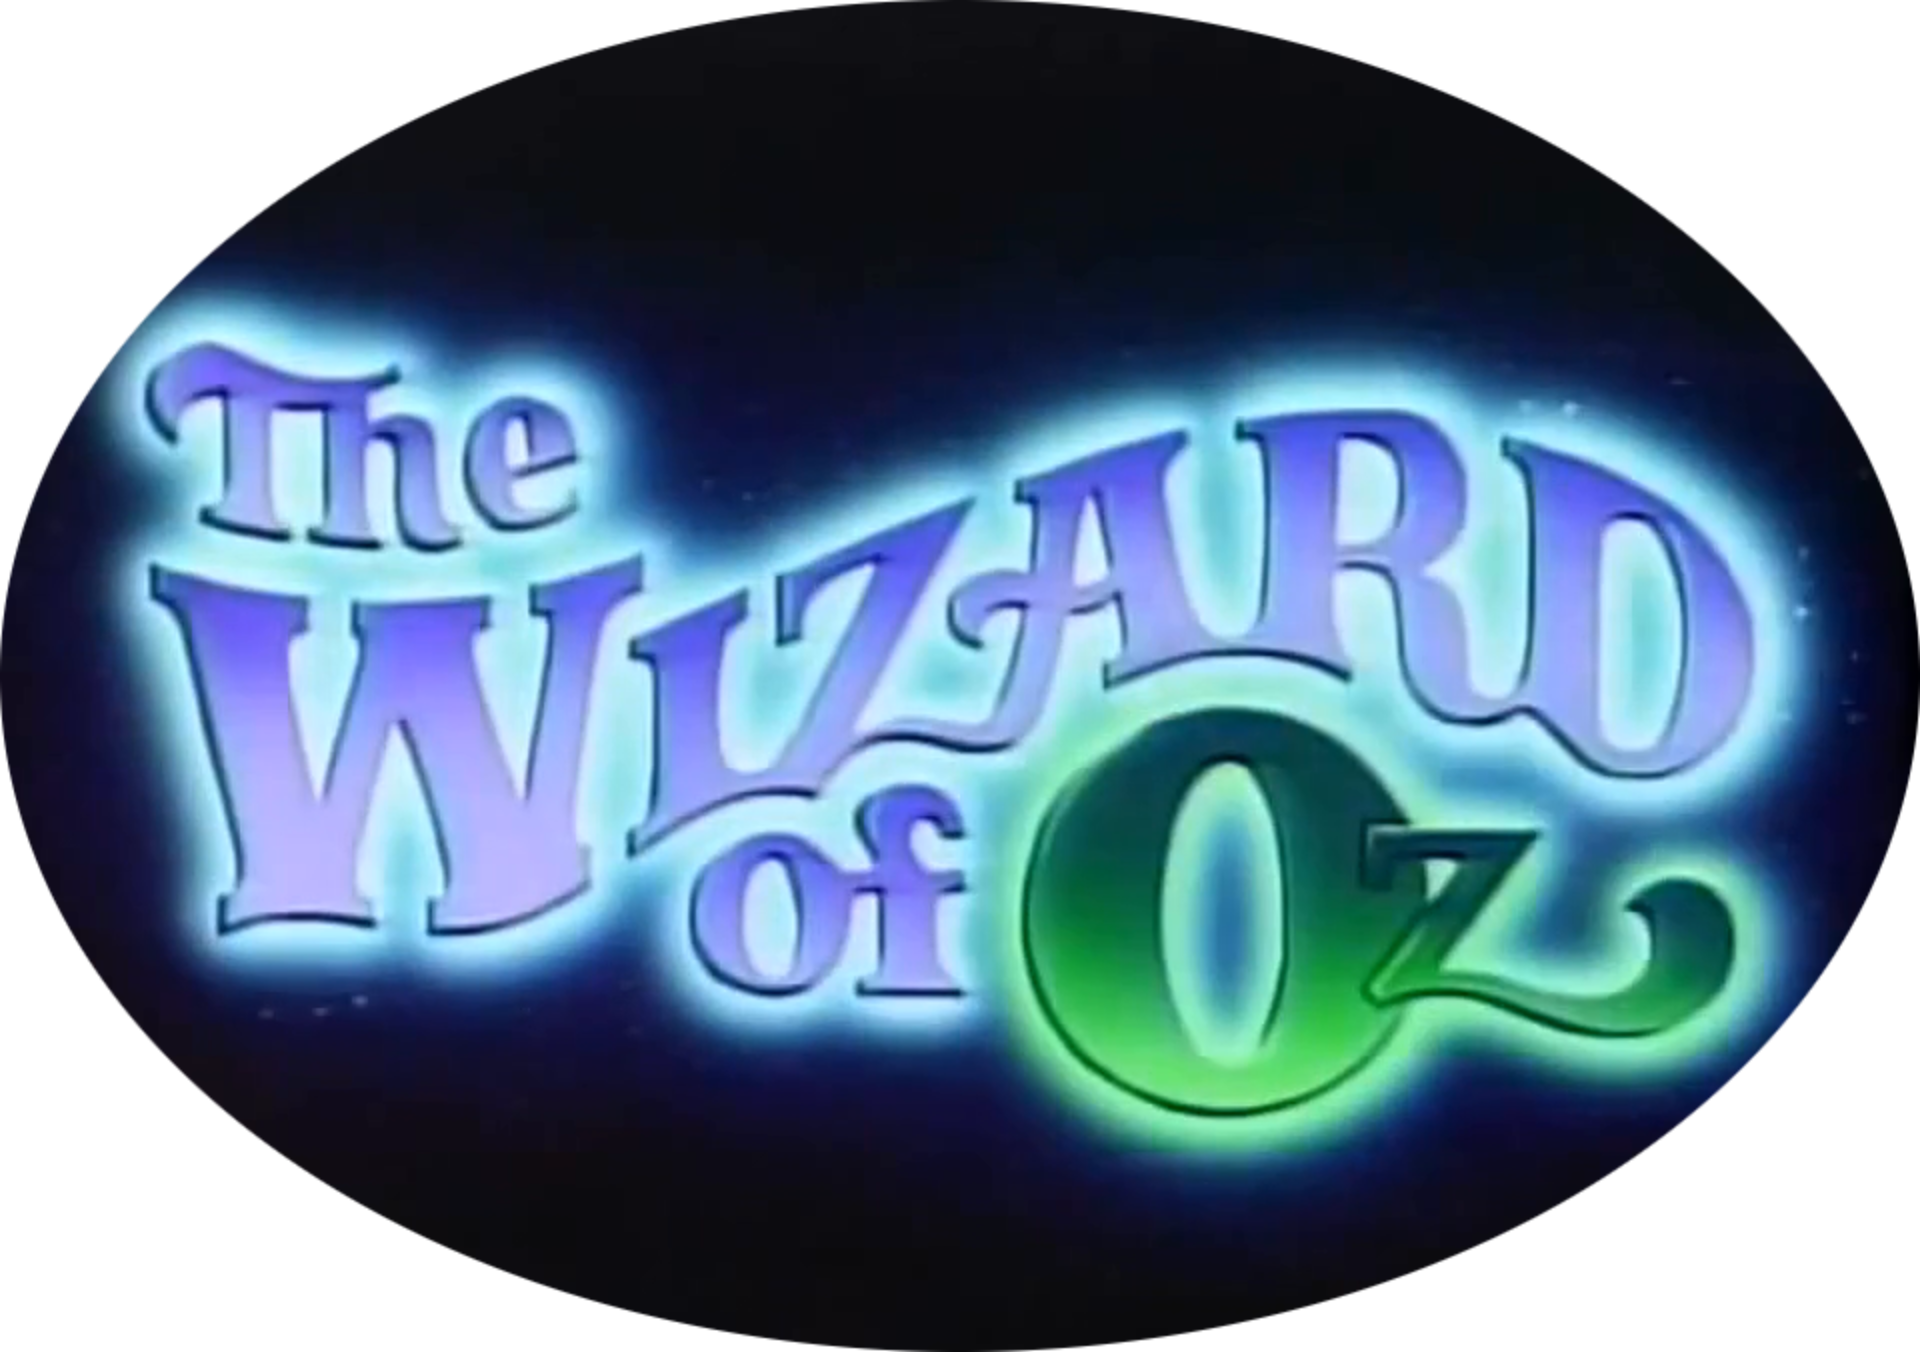 The Wizard of Oz Complete (2 DVDs Box Set)